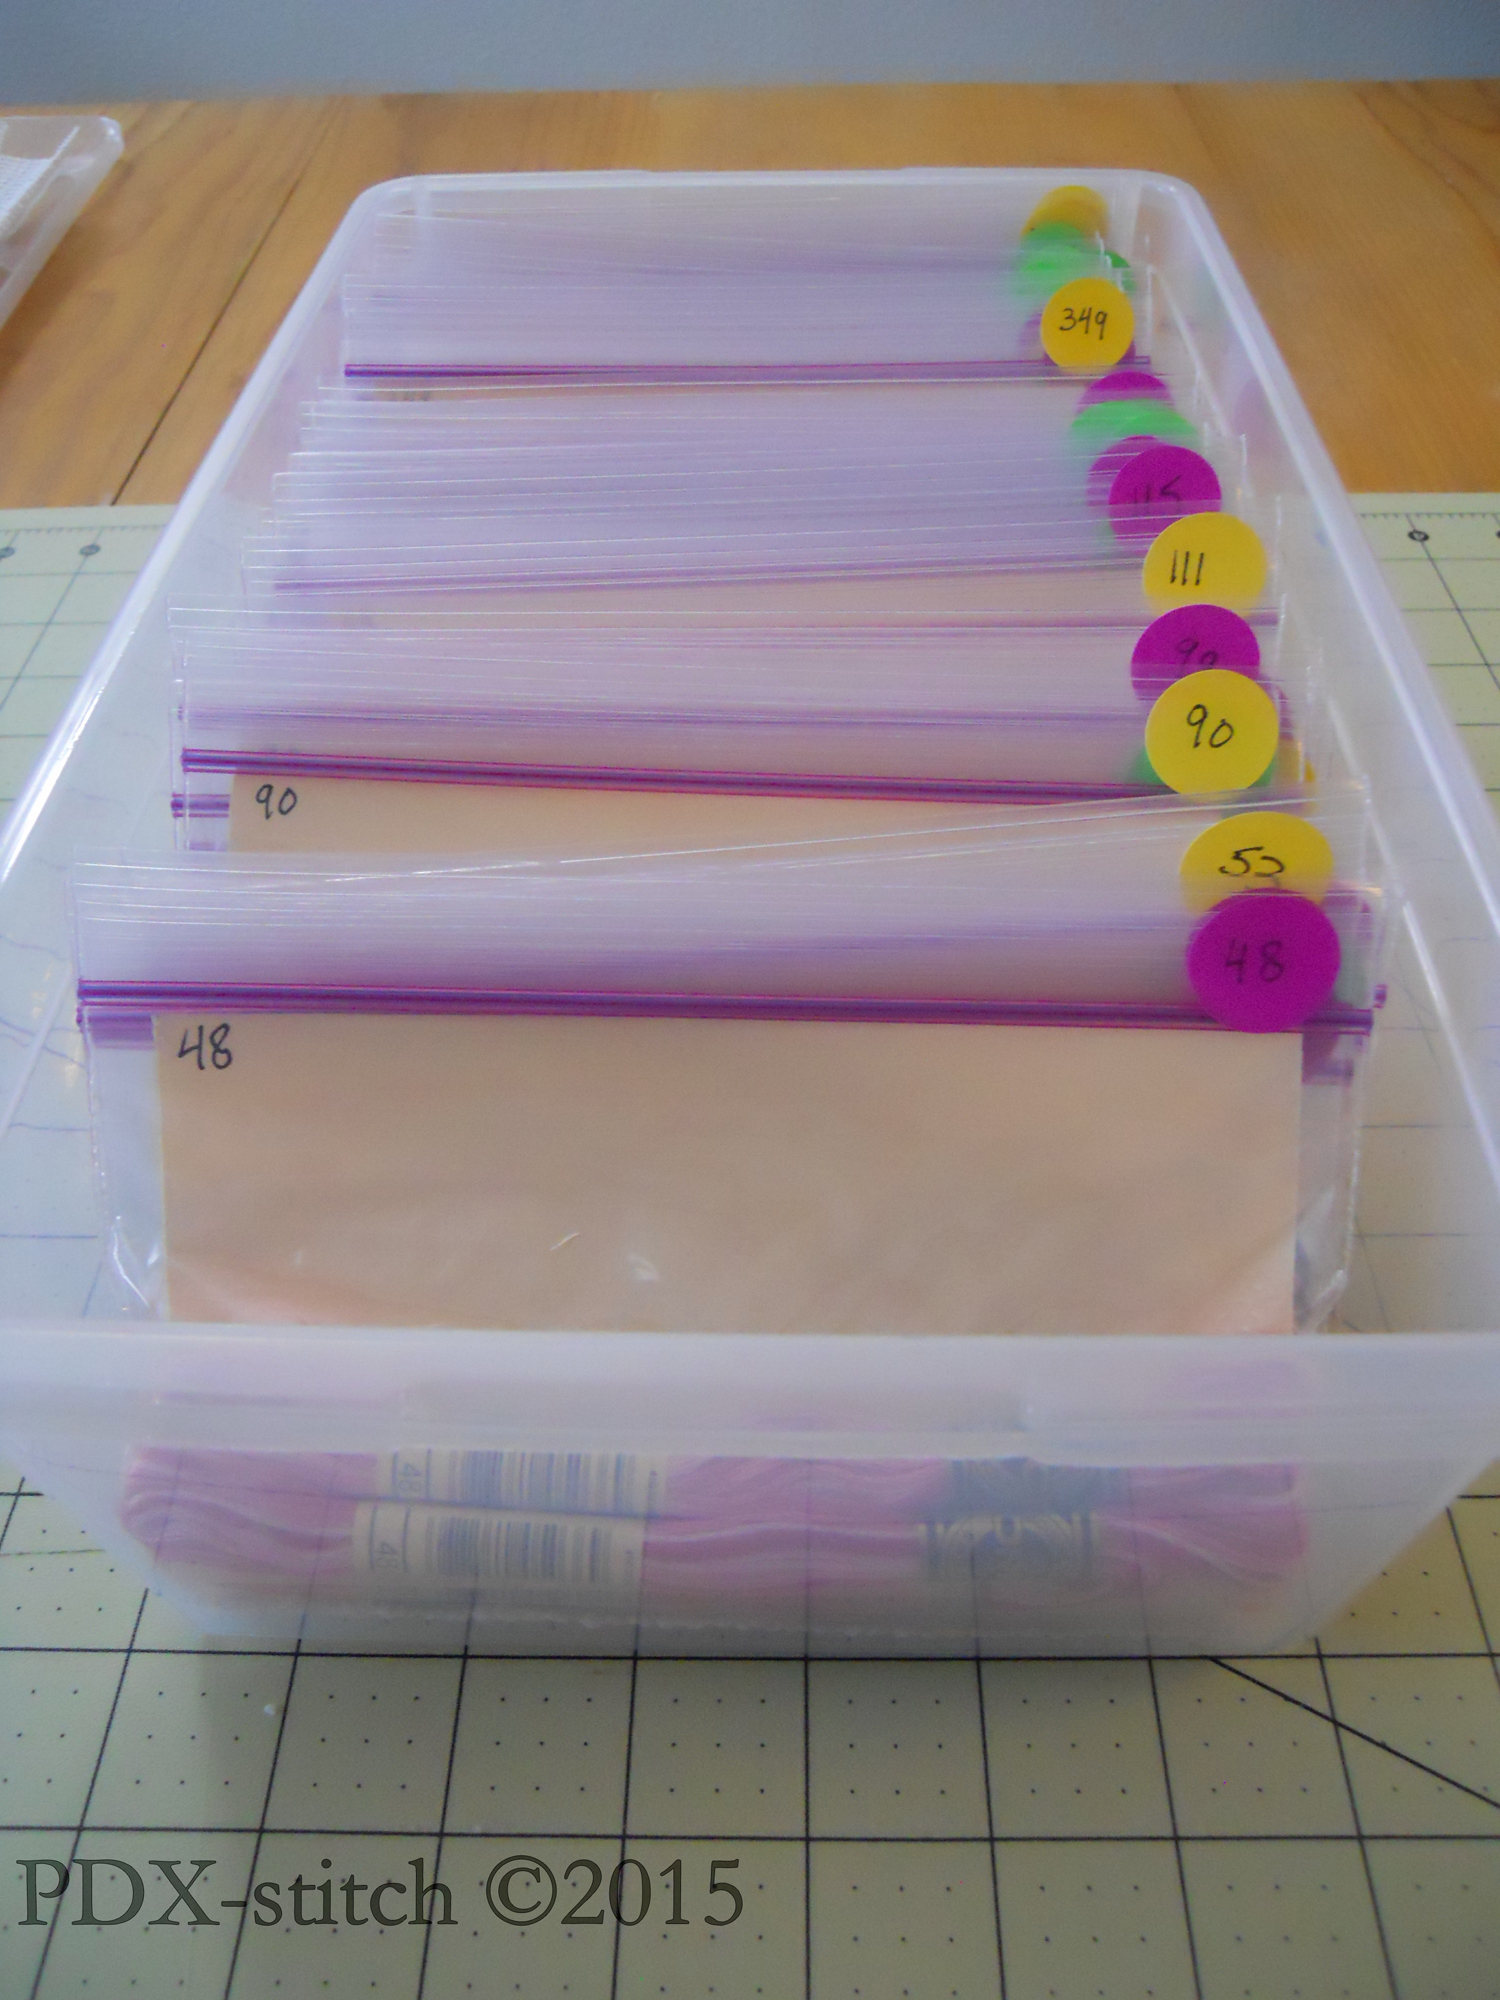 How To Store Embroidery Floss